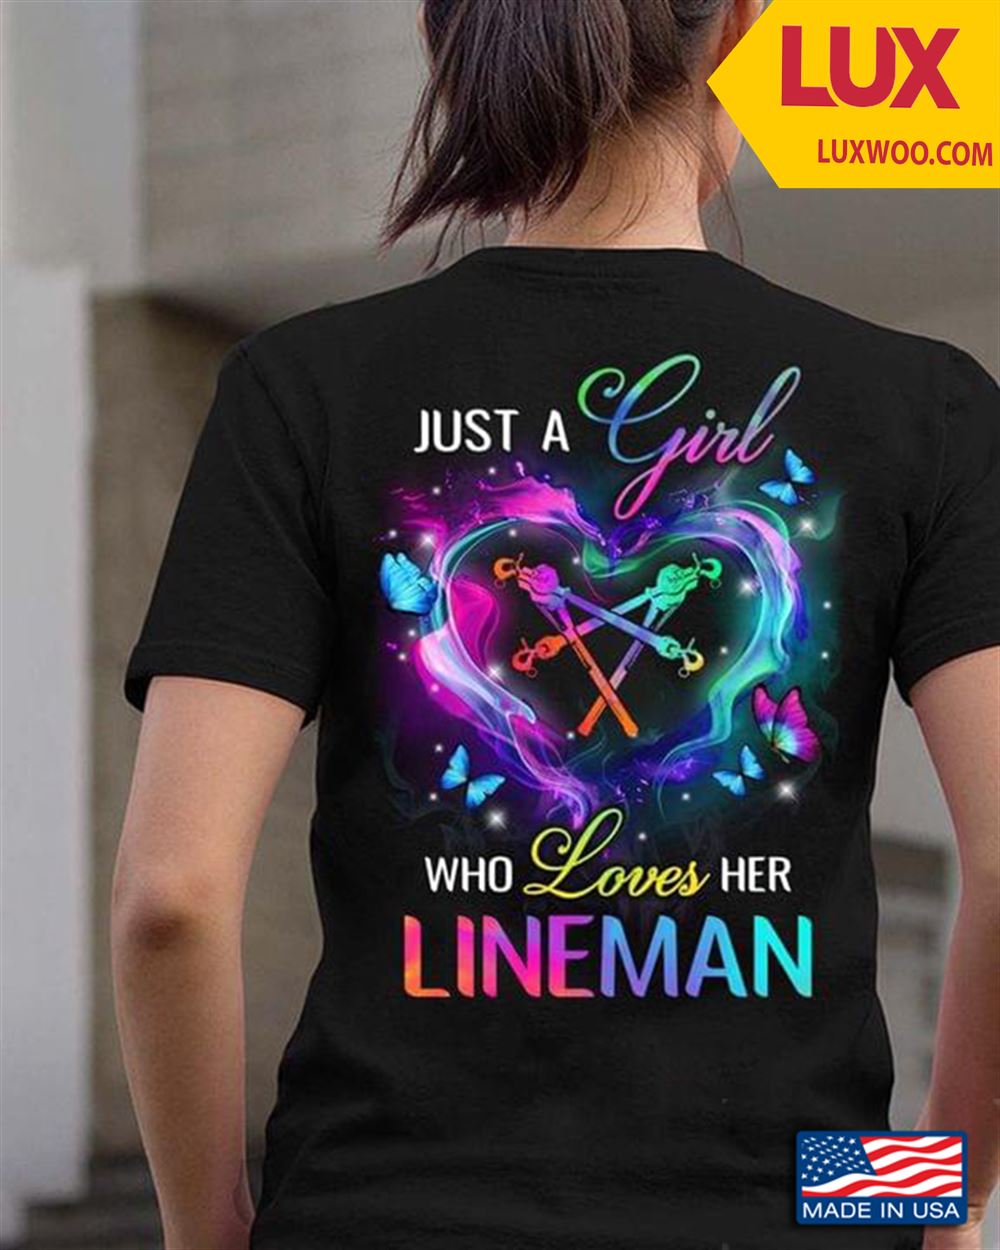 Just A Girl Who Loves Lineman Shirt Size Up To 5xl